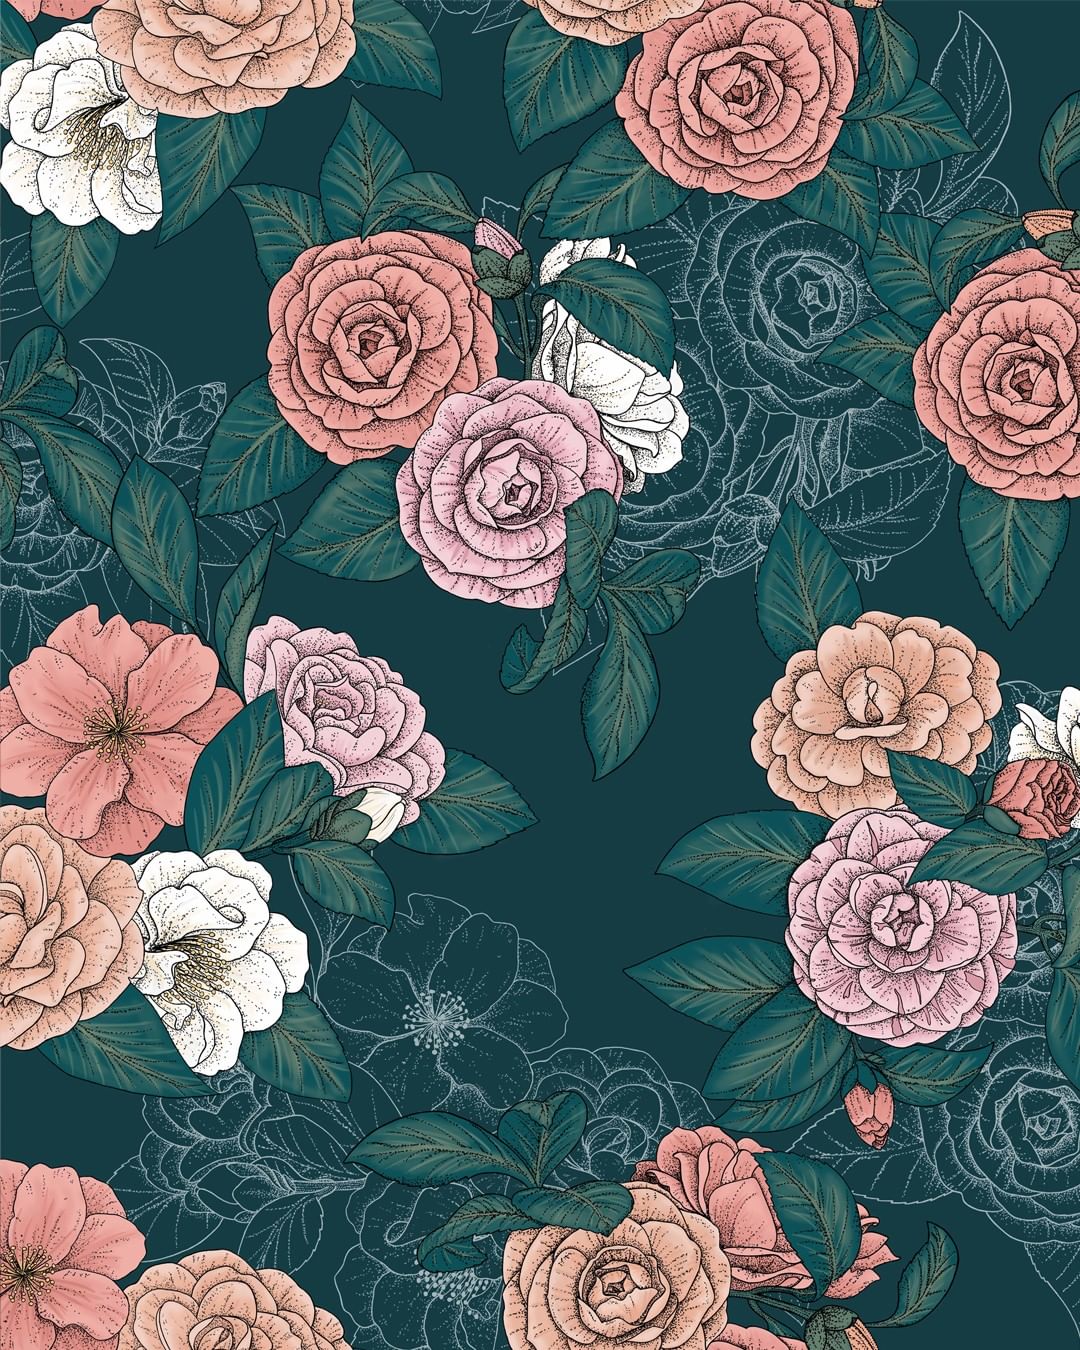 this is the floral print designed by bobbi beck with roses and dark green leaves